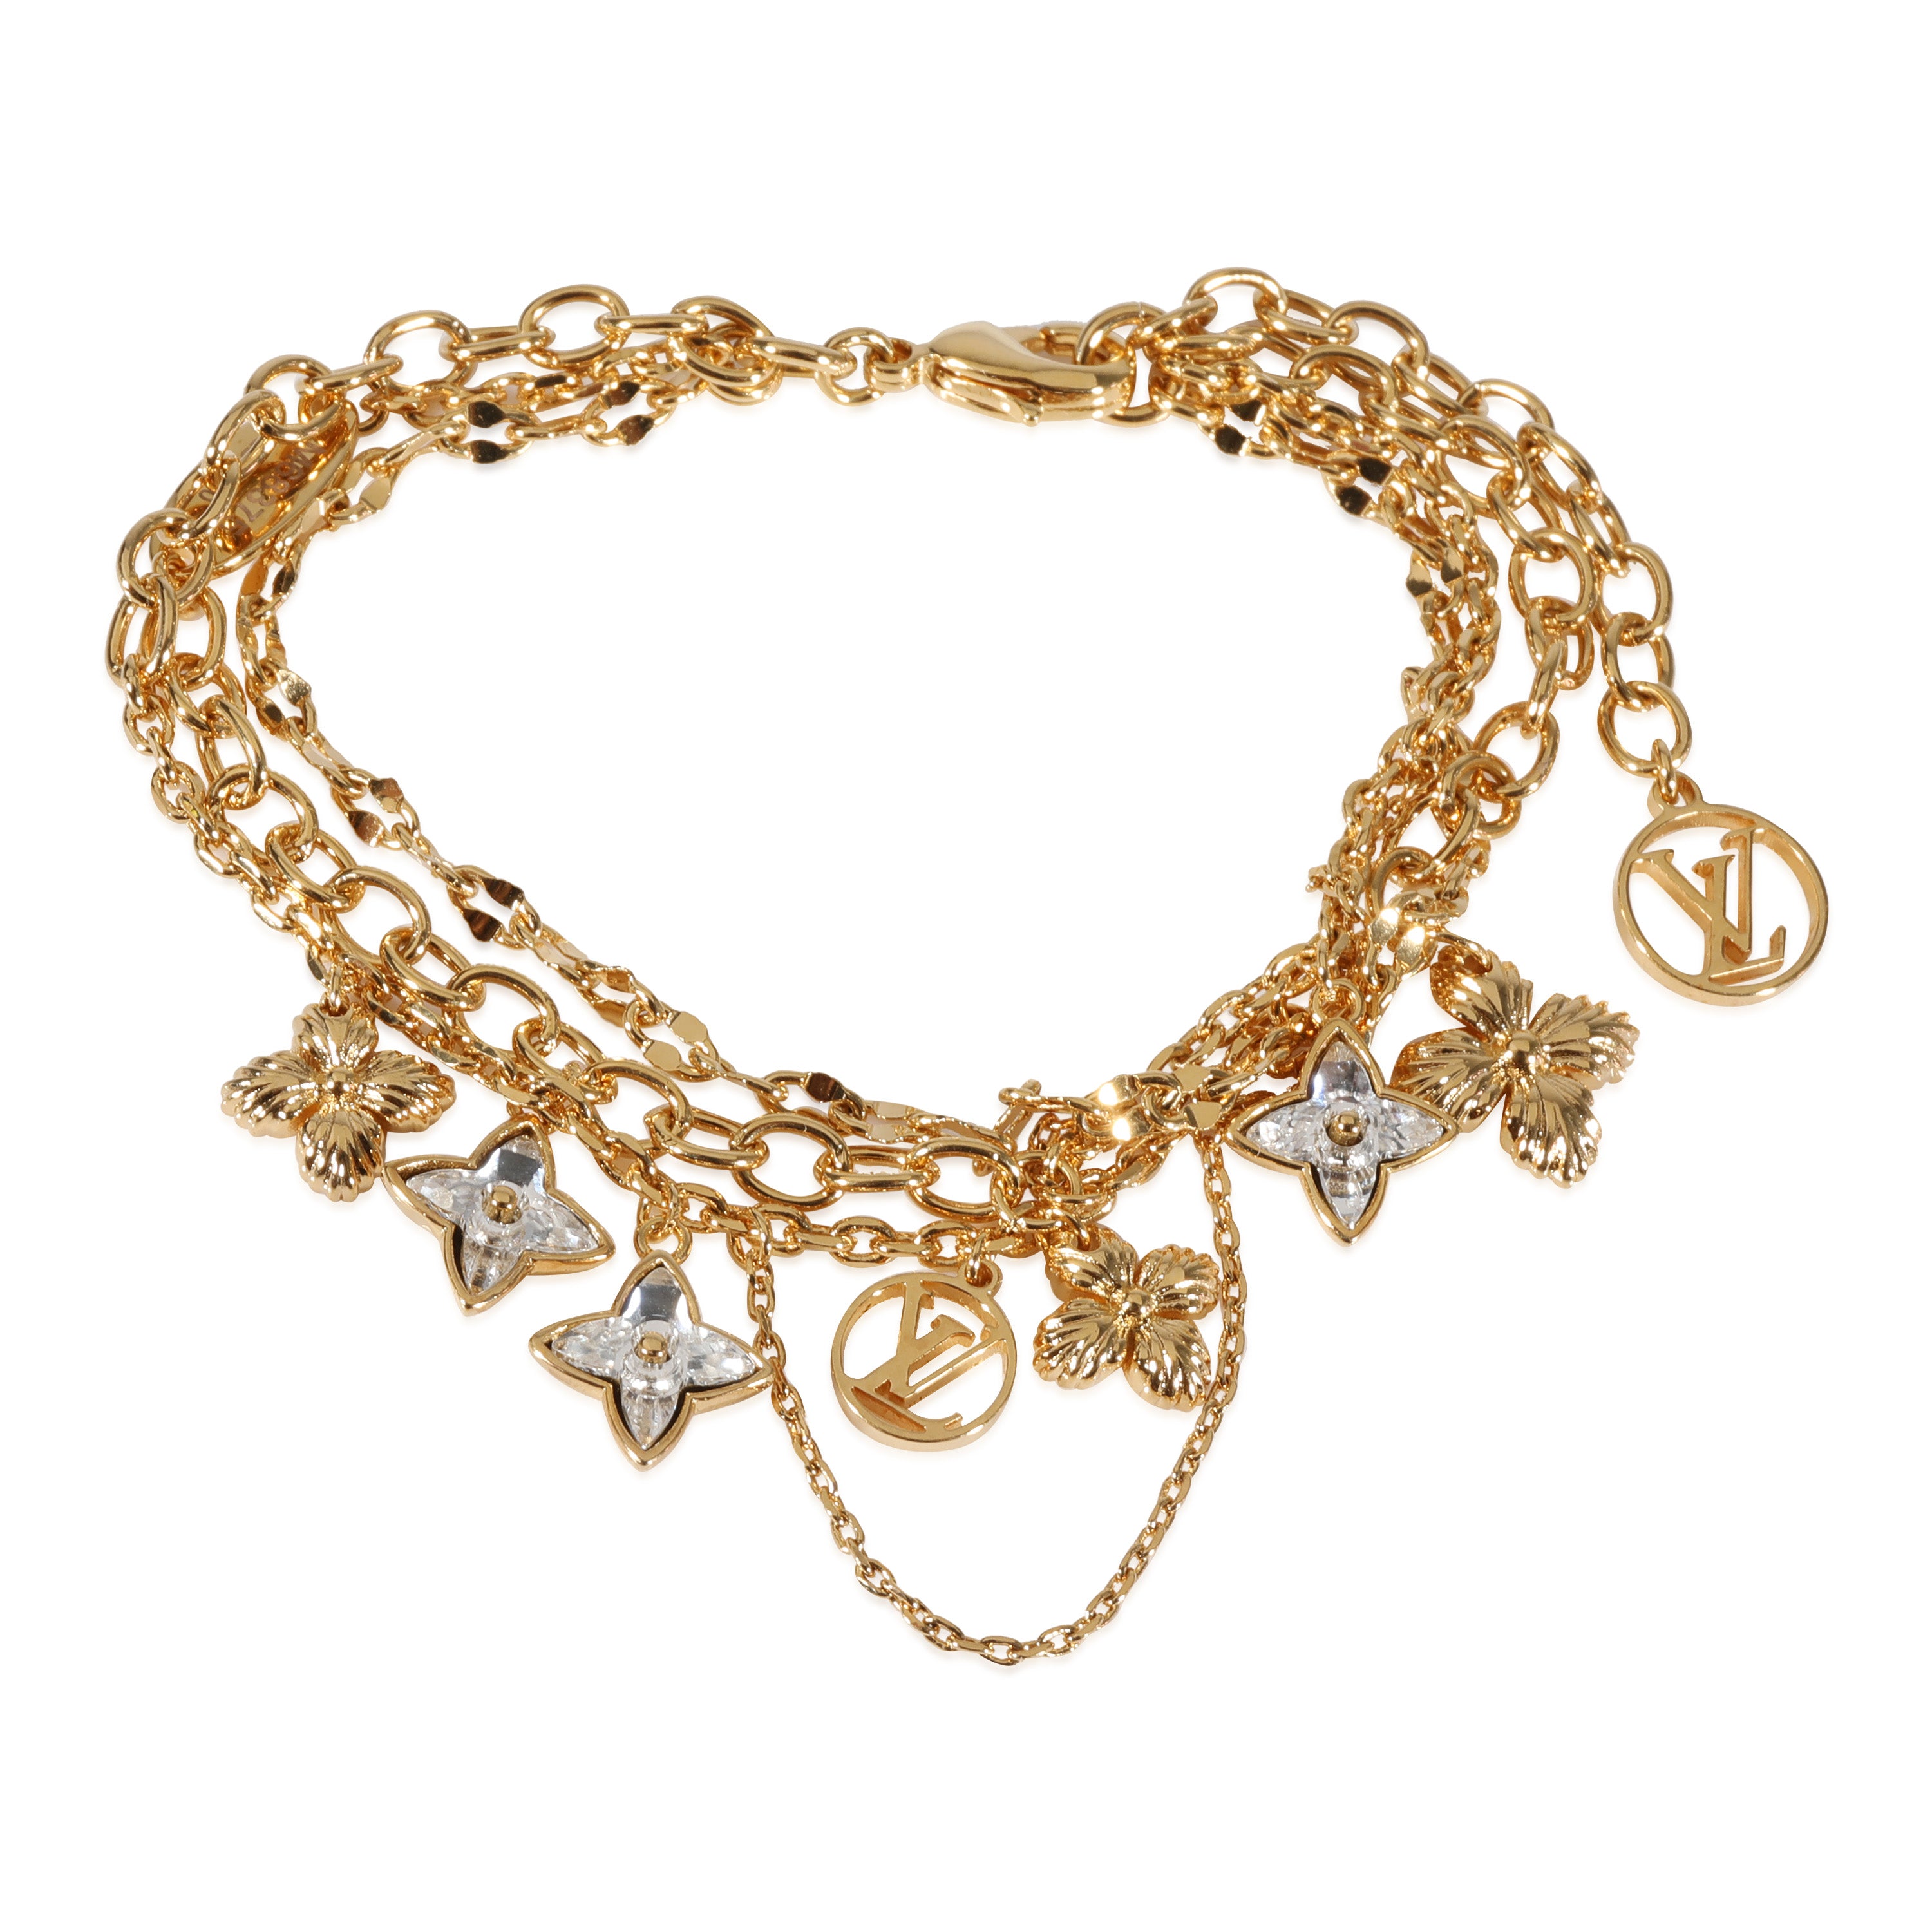 Louis Vuitton Blooming Strass Bracelet In Yellow Gold - Praise To